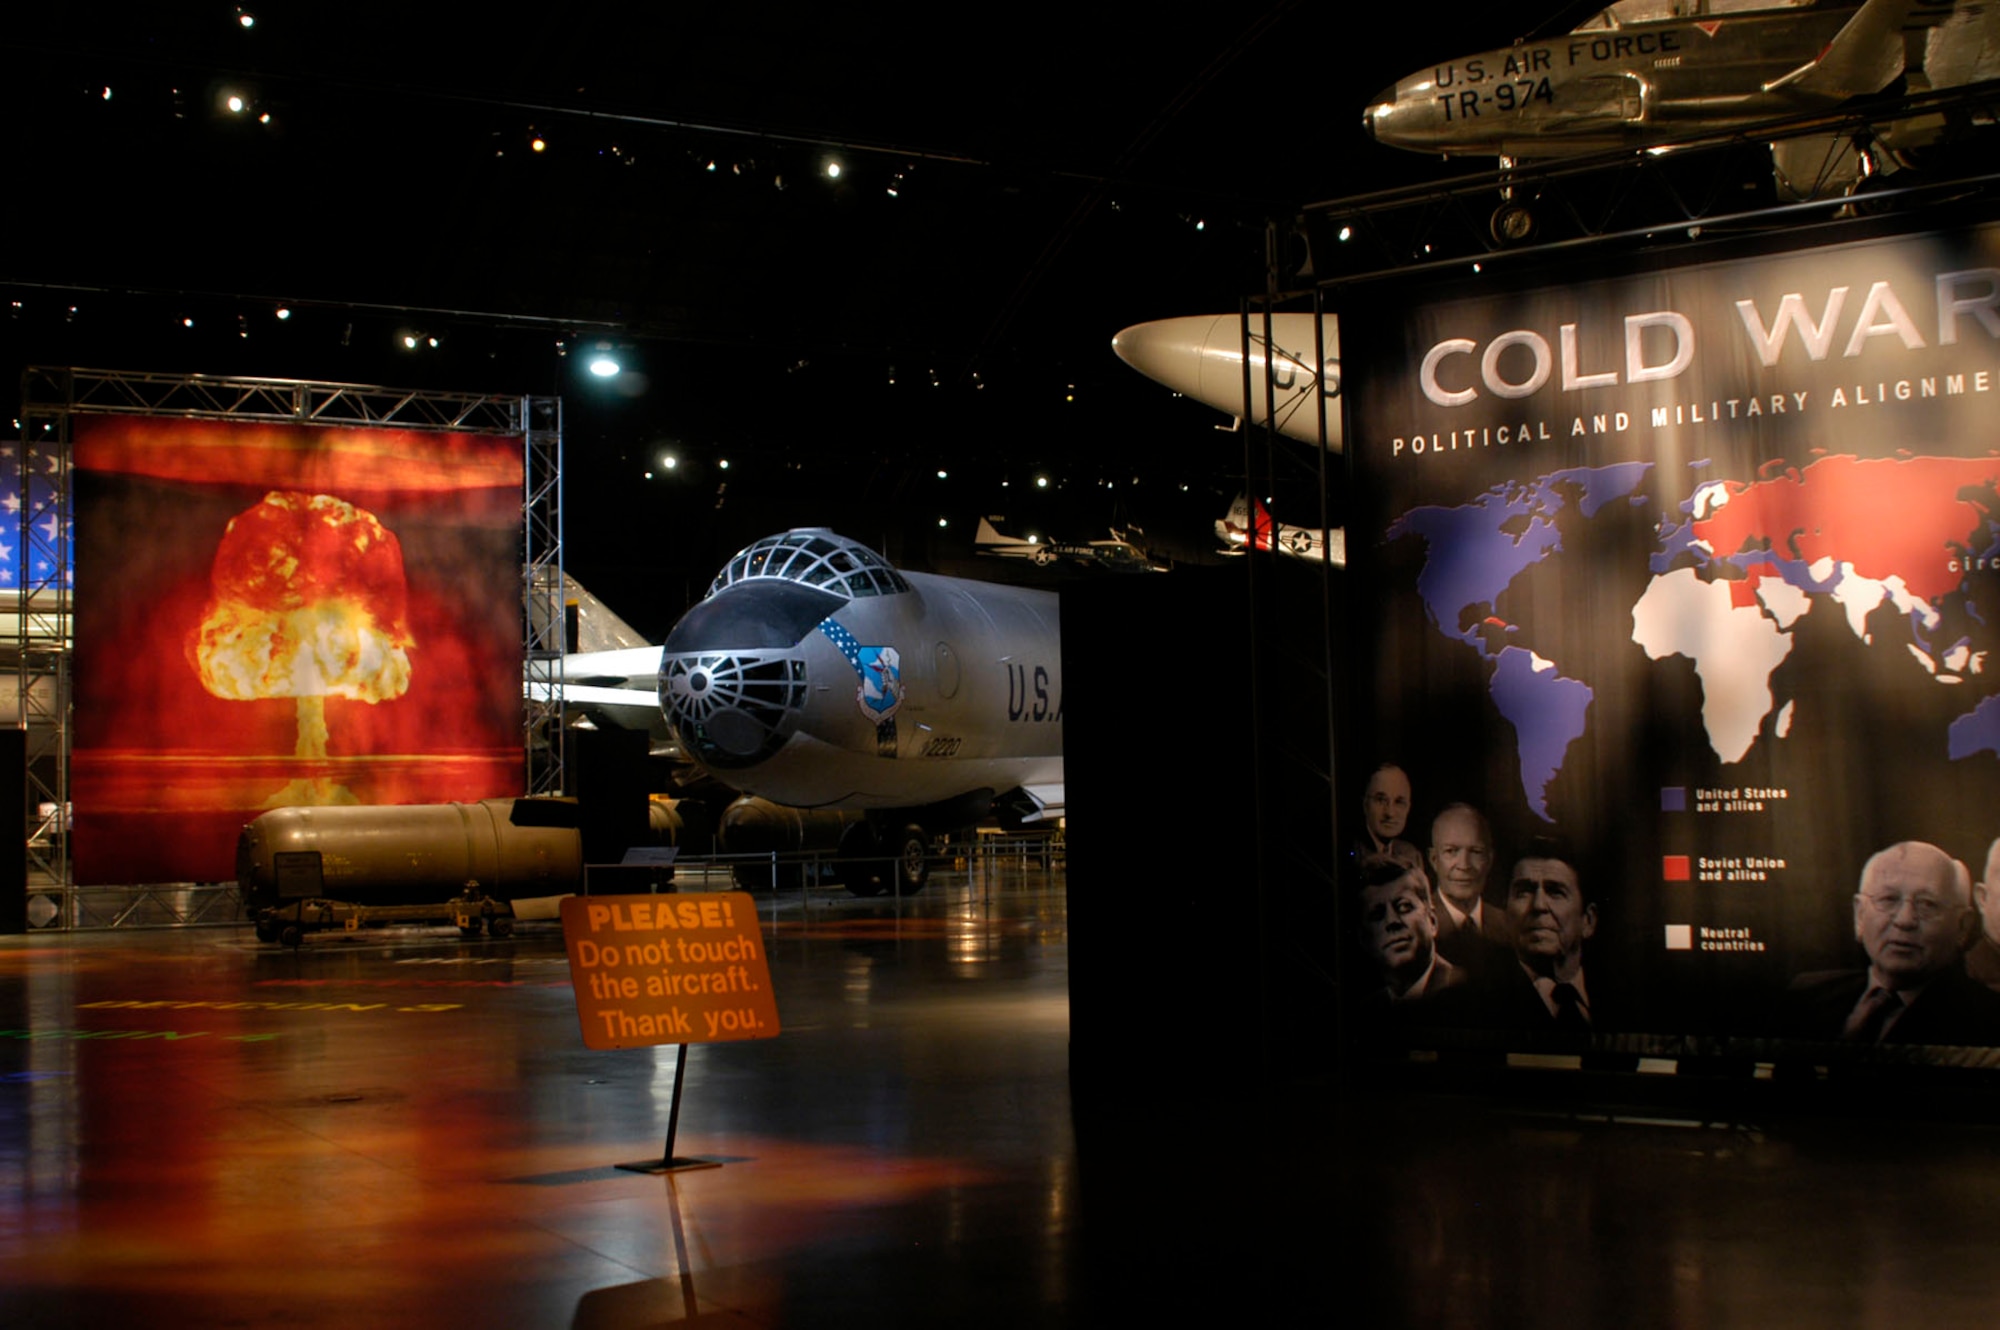 DAYTON, Ohio - The entrance to the Cold War Gallery at the National Museum of the U.S. Air Force. (U.S. Air Force photo)